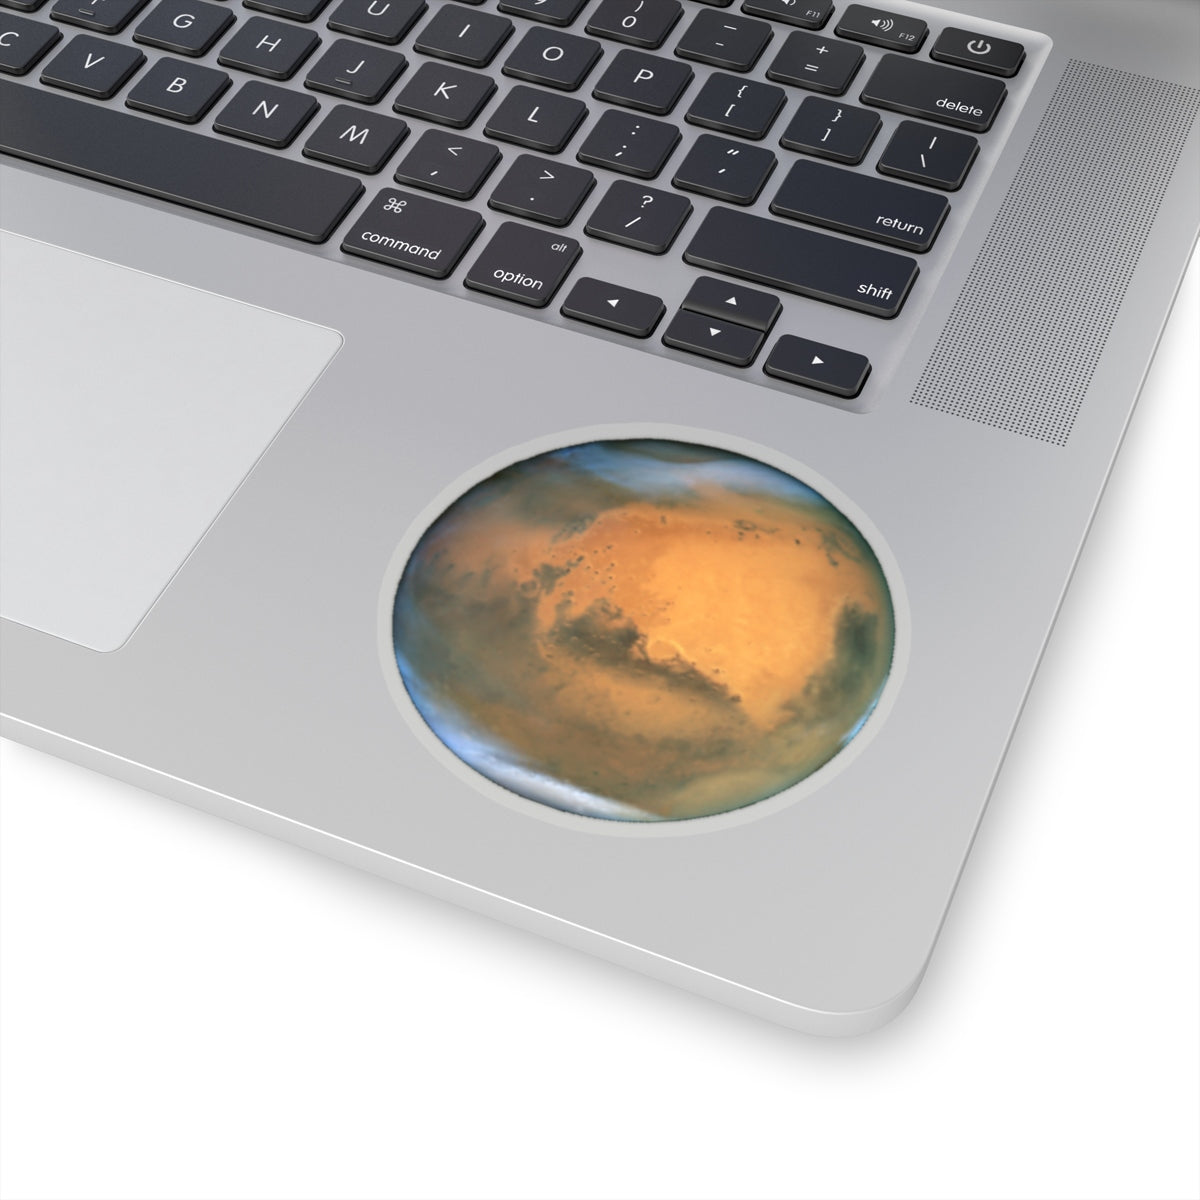 Mars Decal, Planet Stickers Laptop Vinyl Cute Waterbottle Tumbler Car Bumper Aesthetic Label Wall Mural Decal Die Cut Starcove Fashion